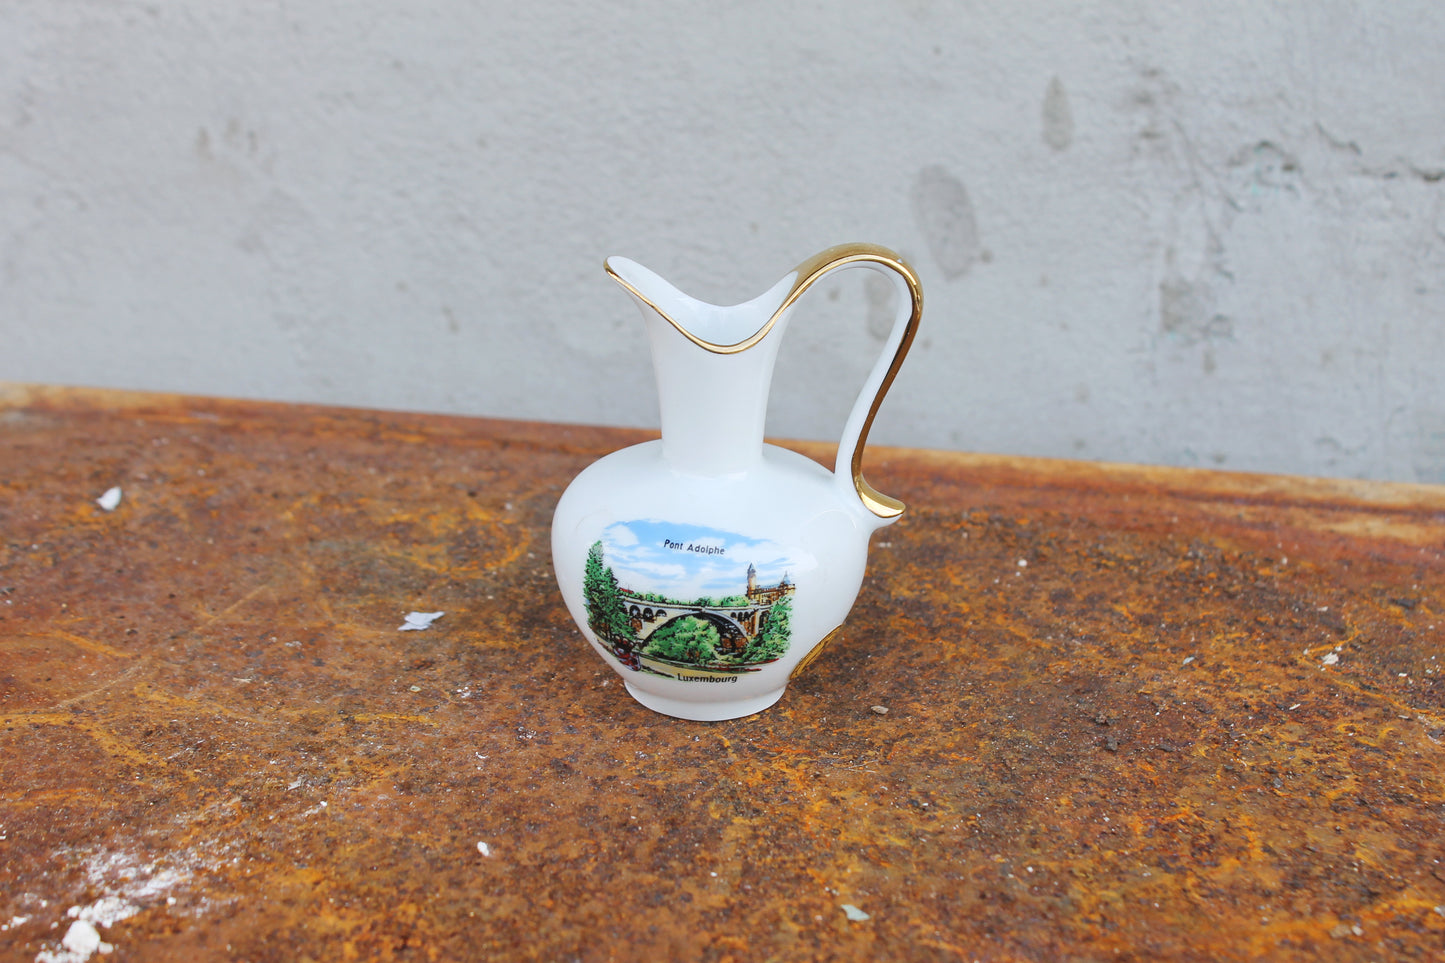 Vintage porcelain small jug - small vase - Luxembourg Pont Adolphe - 3.6 inches - made in Germany - 1990s